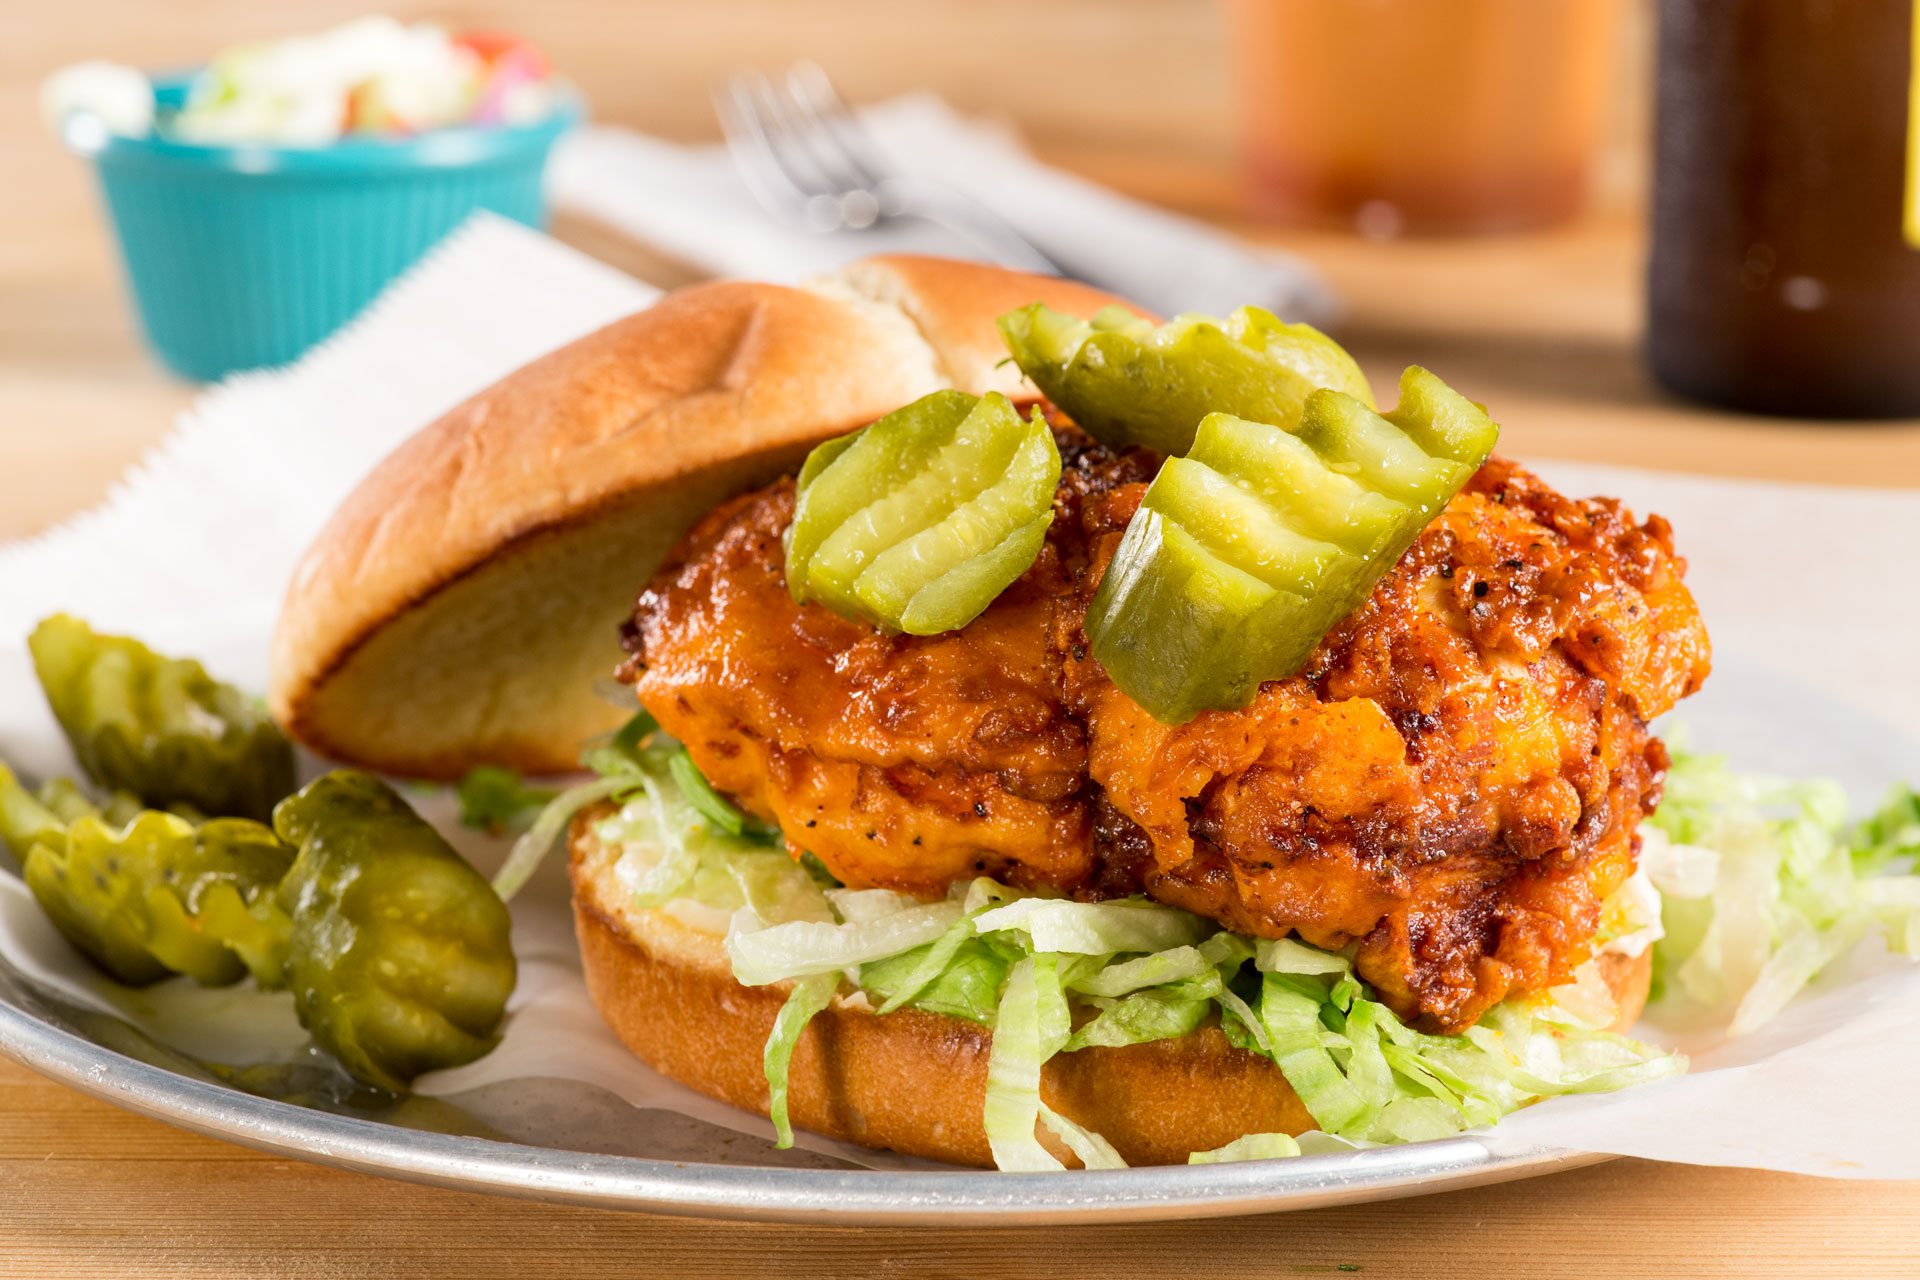 A delicious Nashville-inspired Spicy Fried Chicken Sandwich that has moved far beyond Nashville, popping up on menus across the country, and quickly becoming one of the hottest food trends.